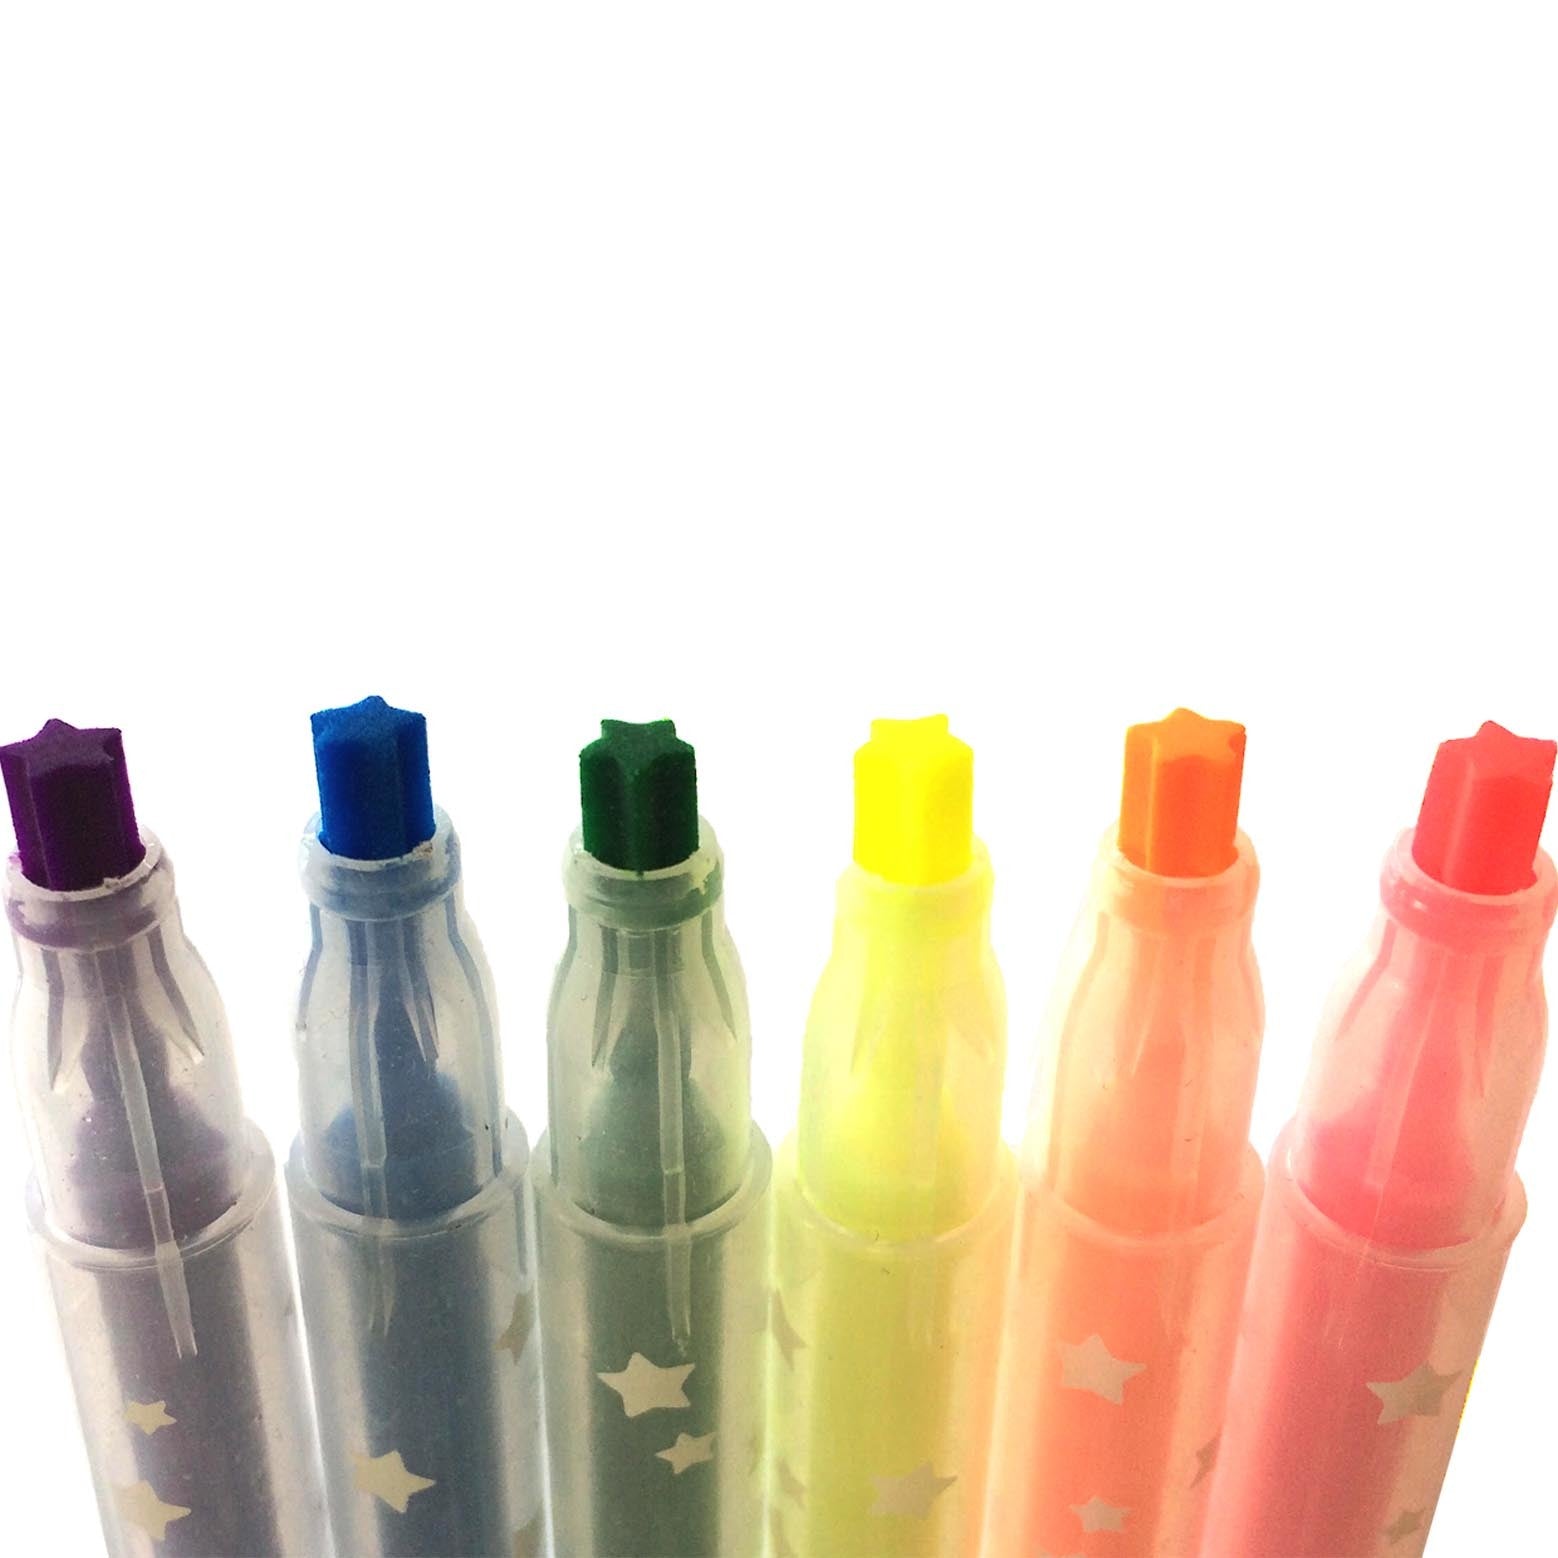 Tiger Tribe | Scented Star Markers - 6pk